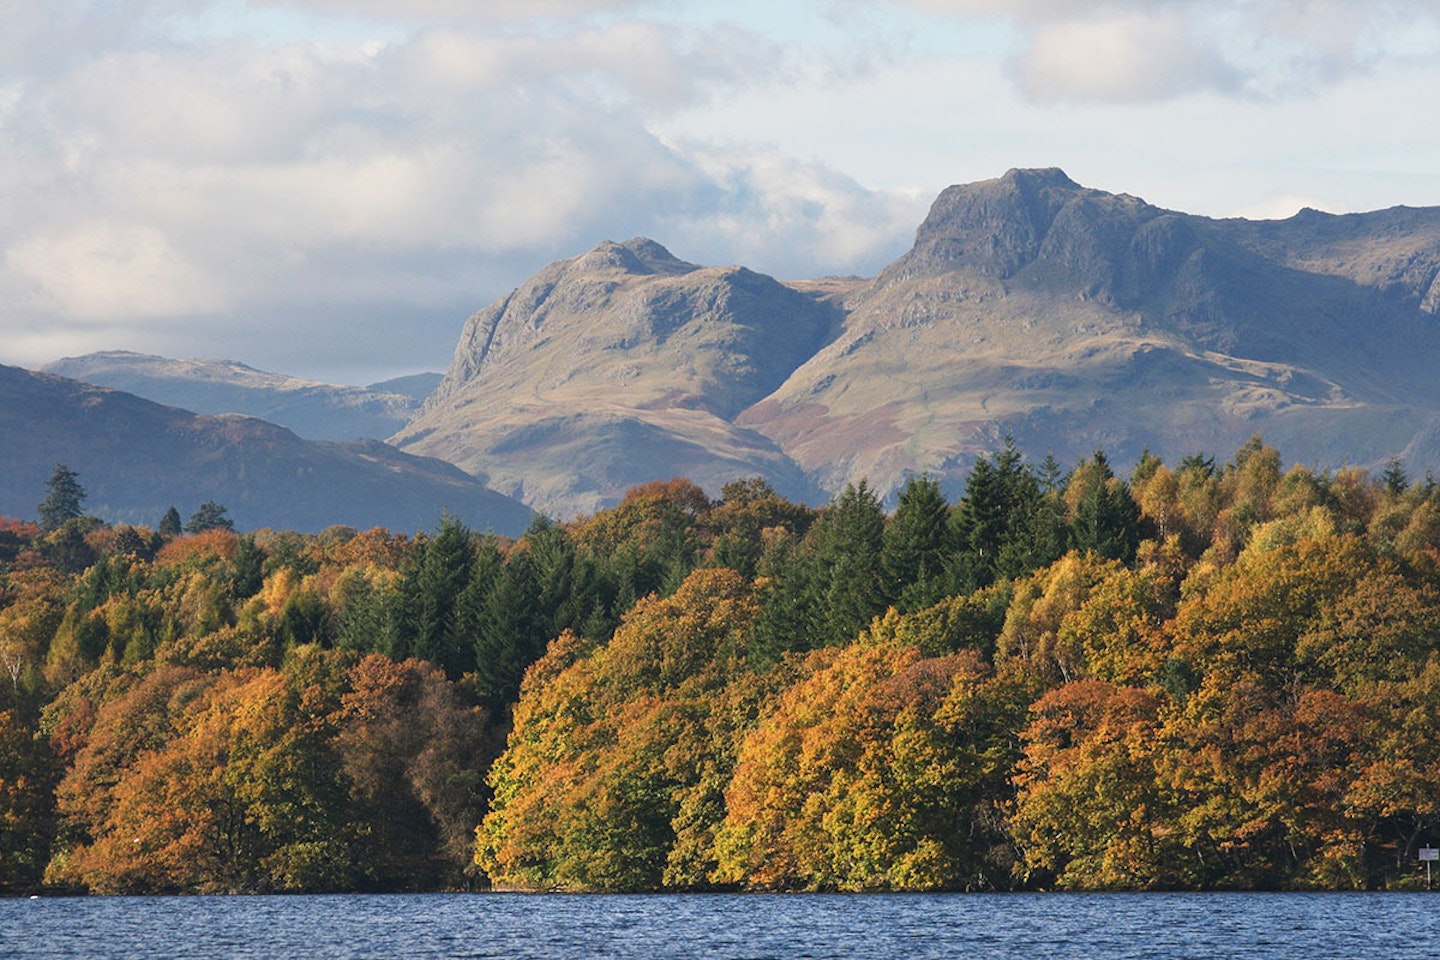 The rugged skyline of the Langdale Pikes